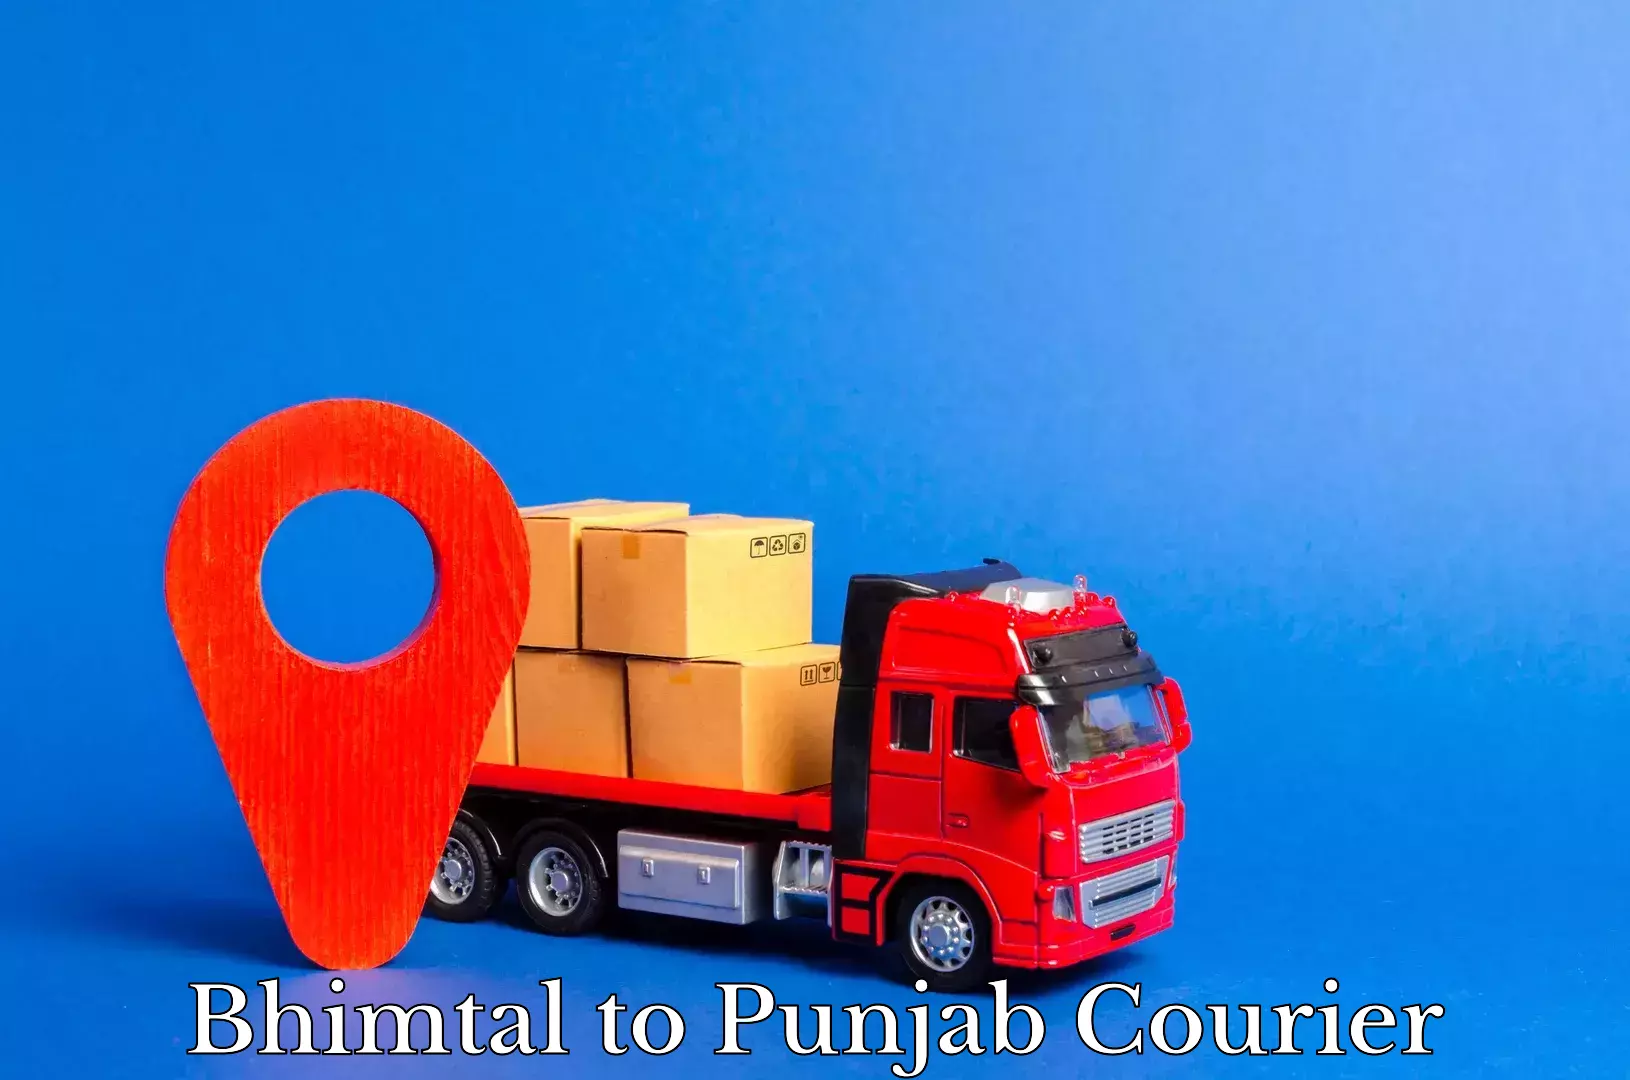 On-call courier service Bhimtal to Punjab